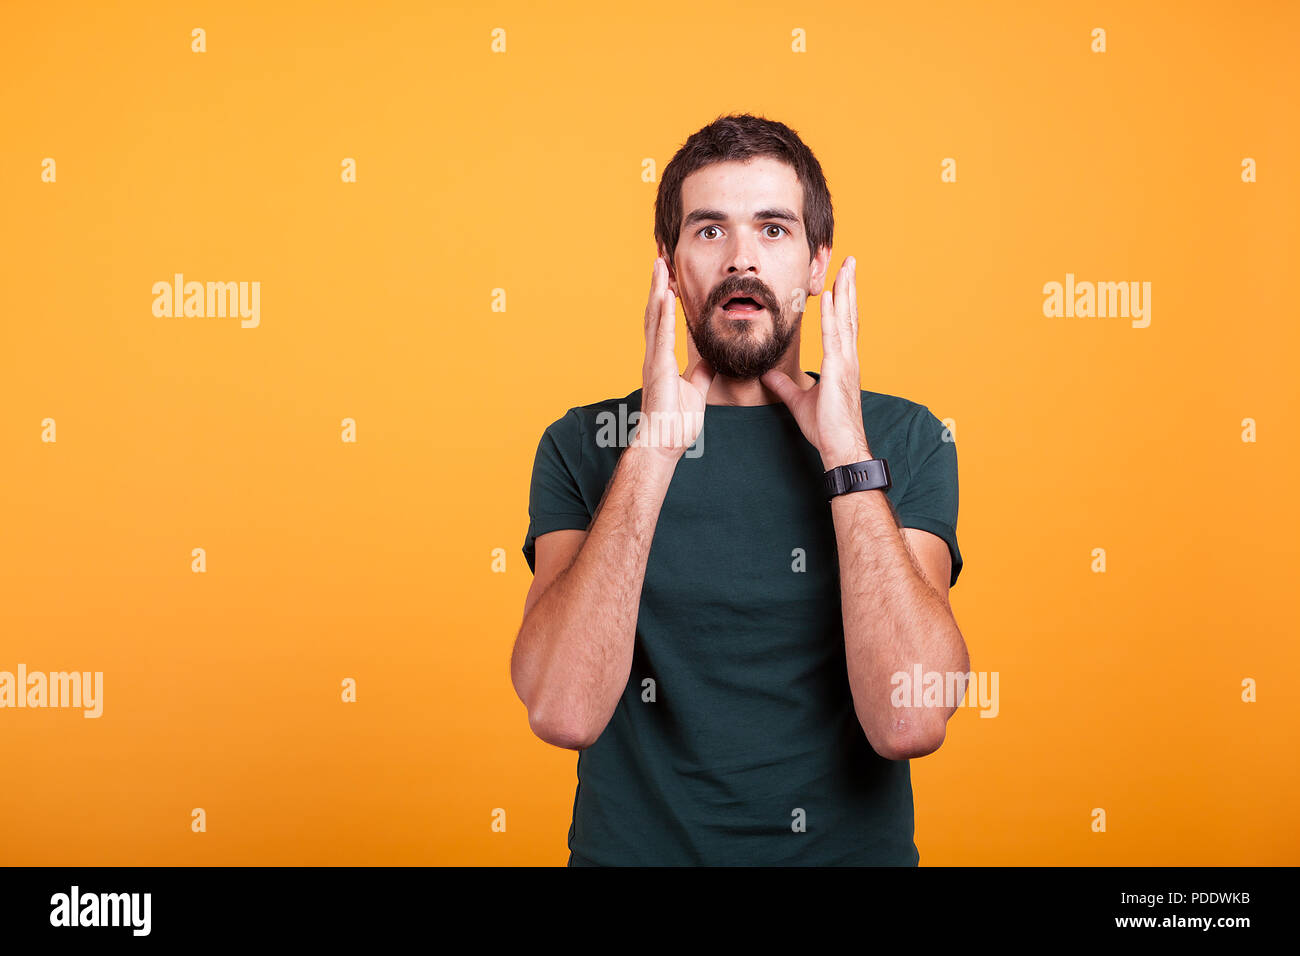 Shocked man with hands at his face looking at the camera. Copyspace available for your advertisement or promo Stock Photo